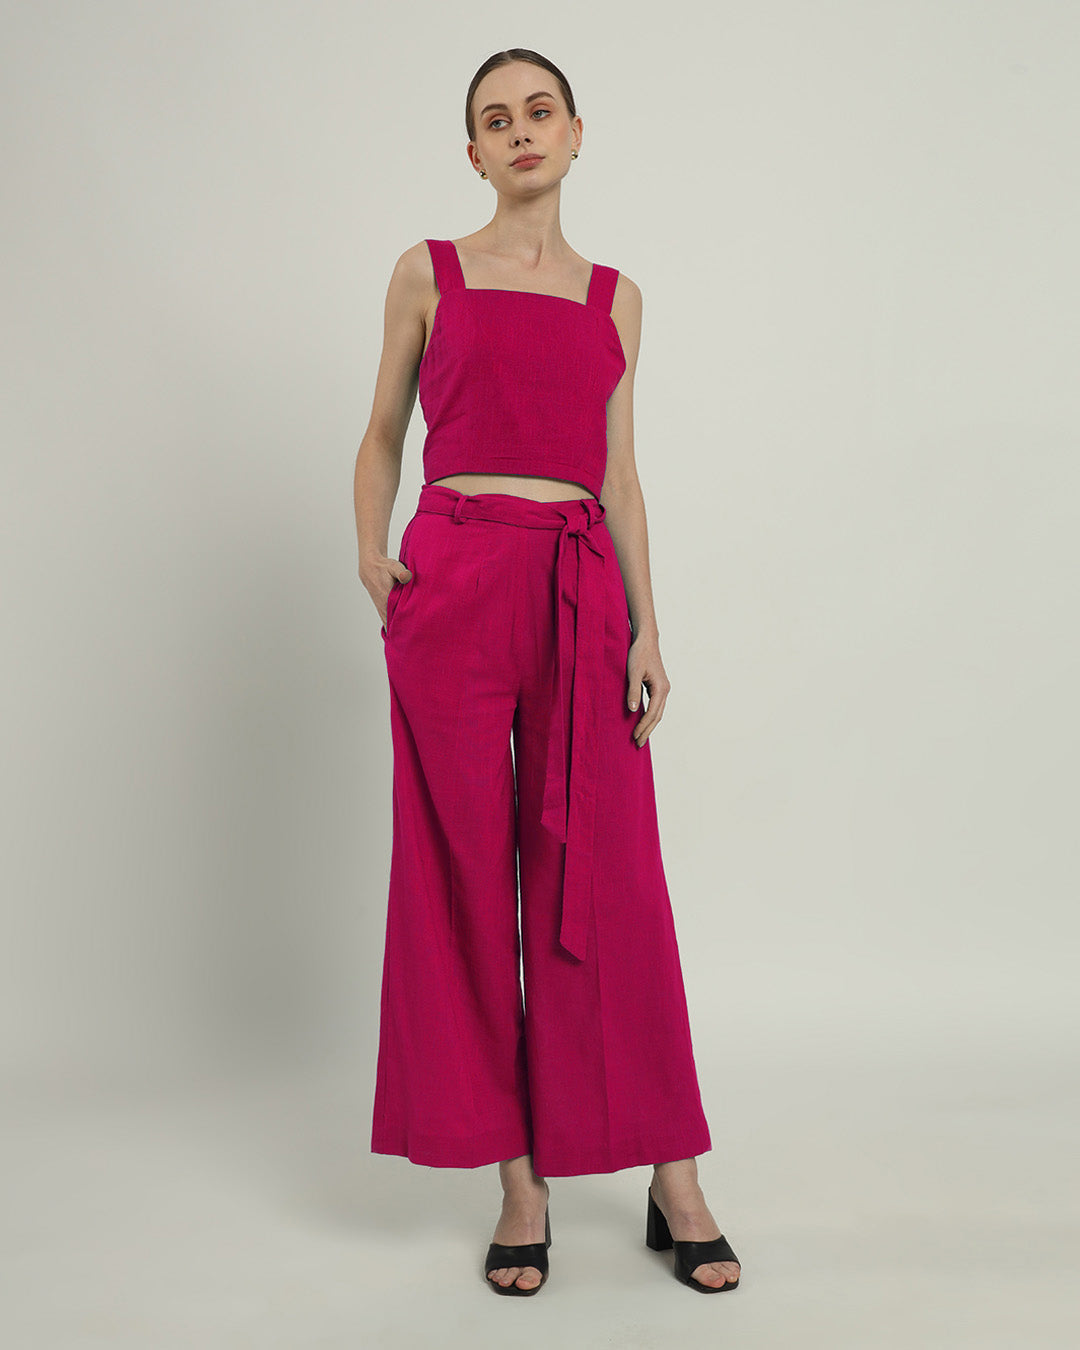 Berry Sleek Square Crop Solid Top (Without Bottoms)